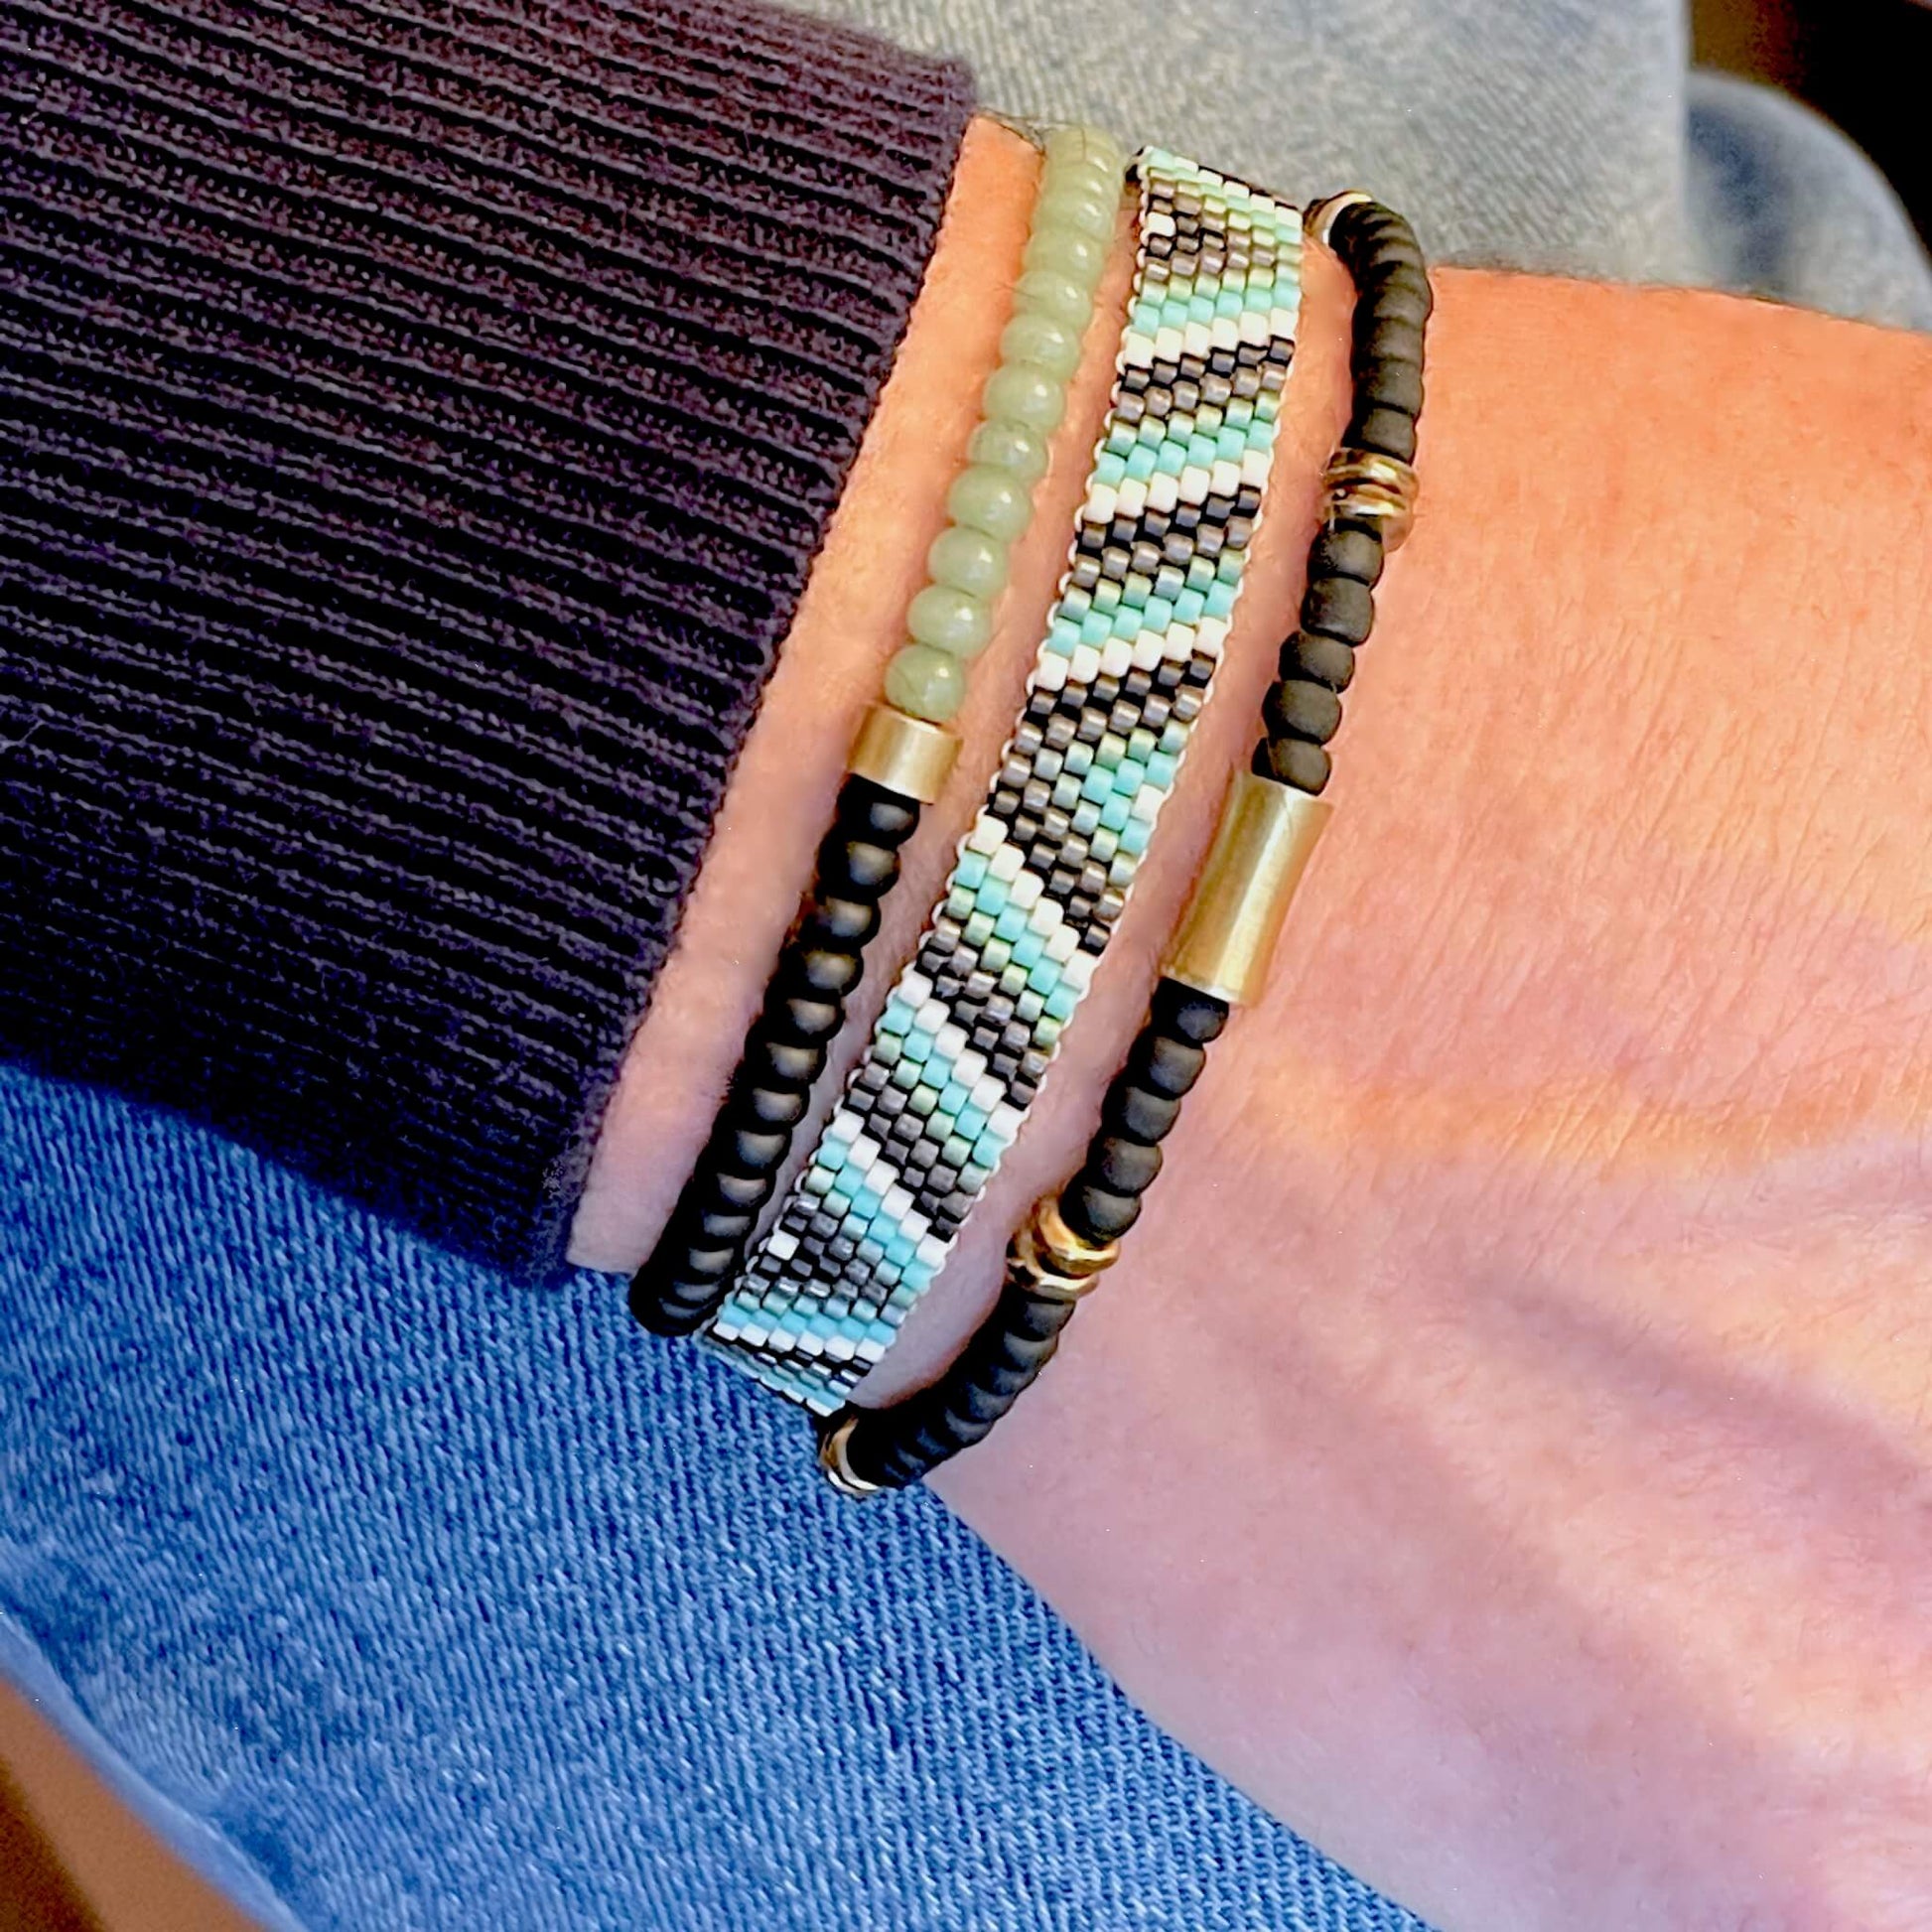 Men's beaded bracelet stack with a woven black, aqua and white seed bead band and two black and green stretch bracelets with raw brass accents.